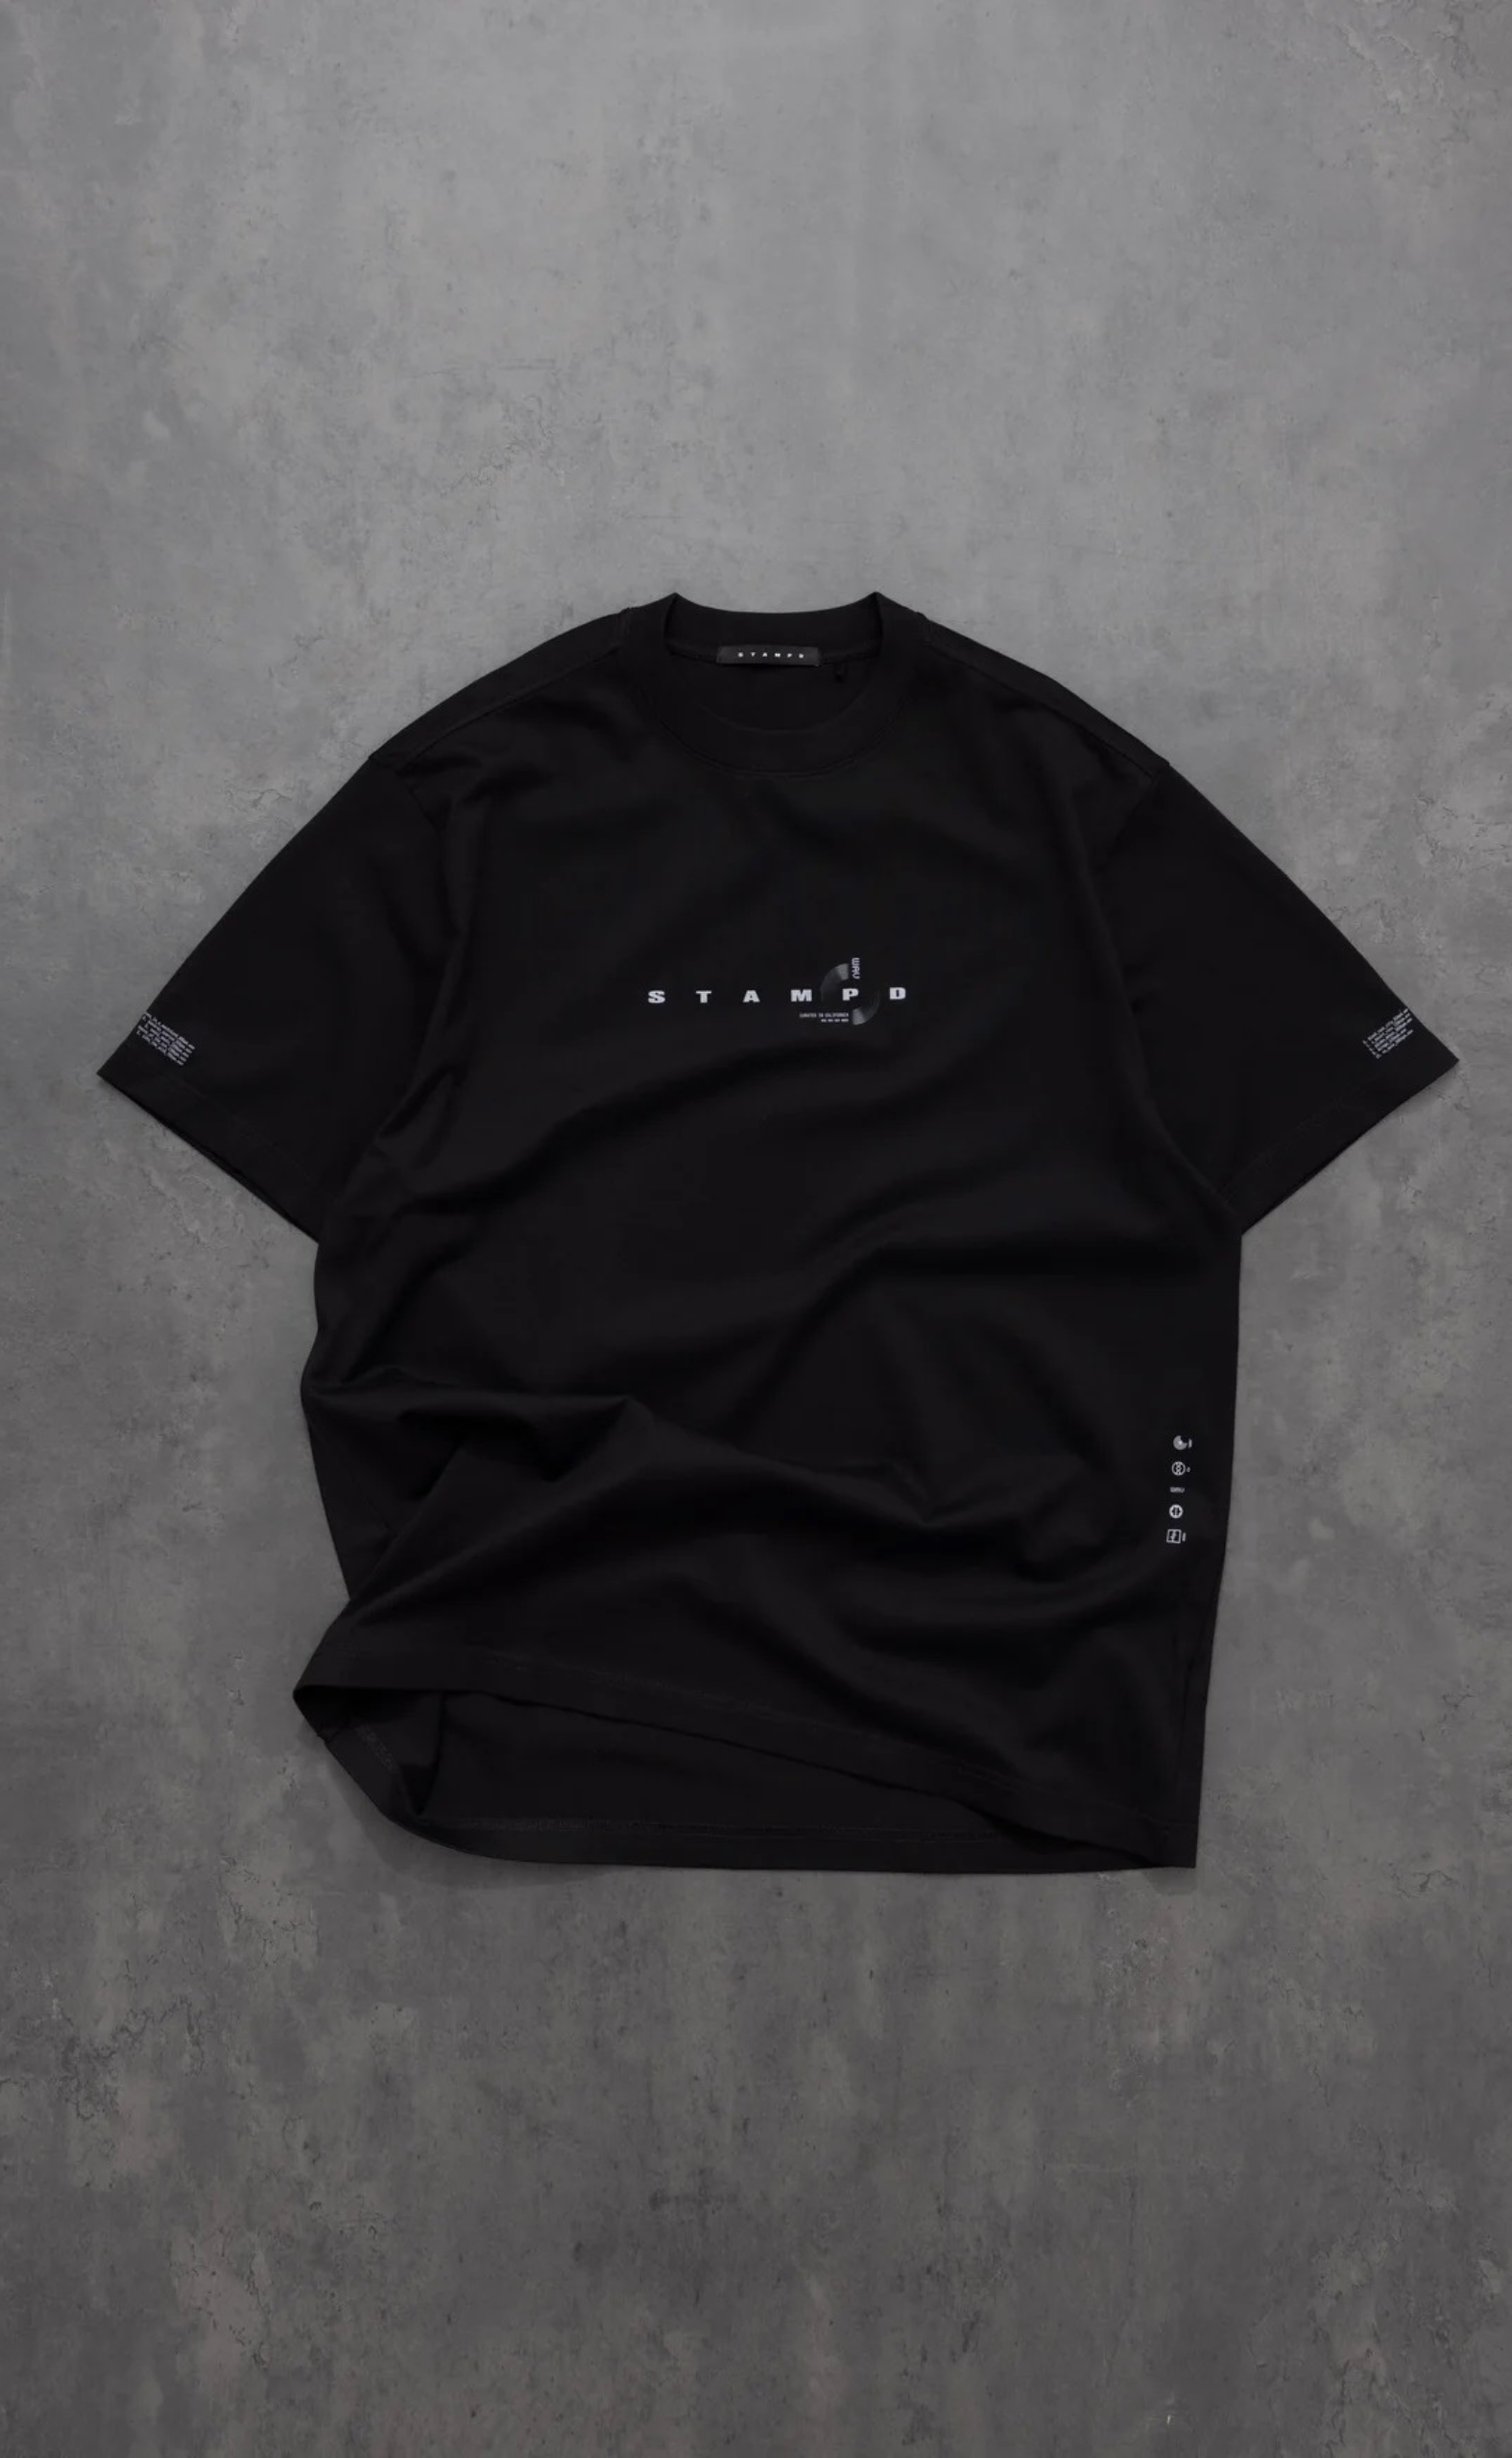 STAMPD SOUND SYSTEM RELAXED BLACK T-SHIRT